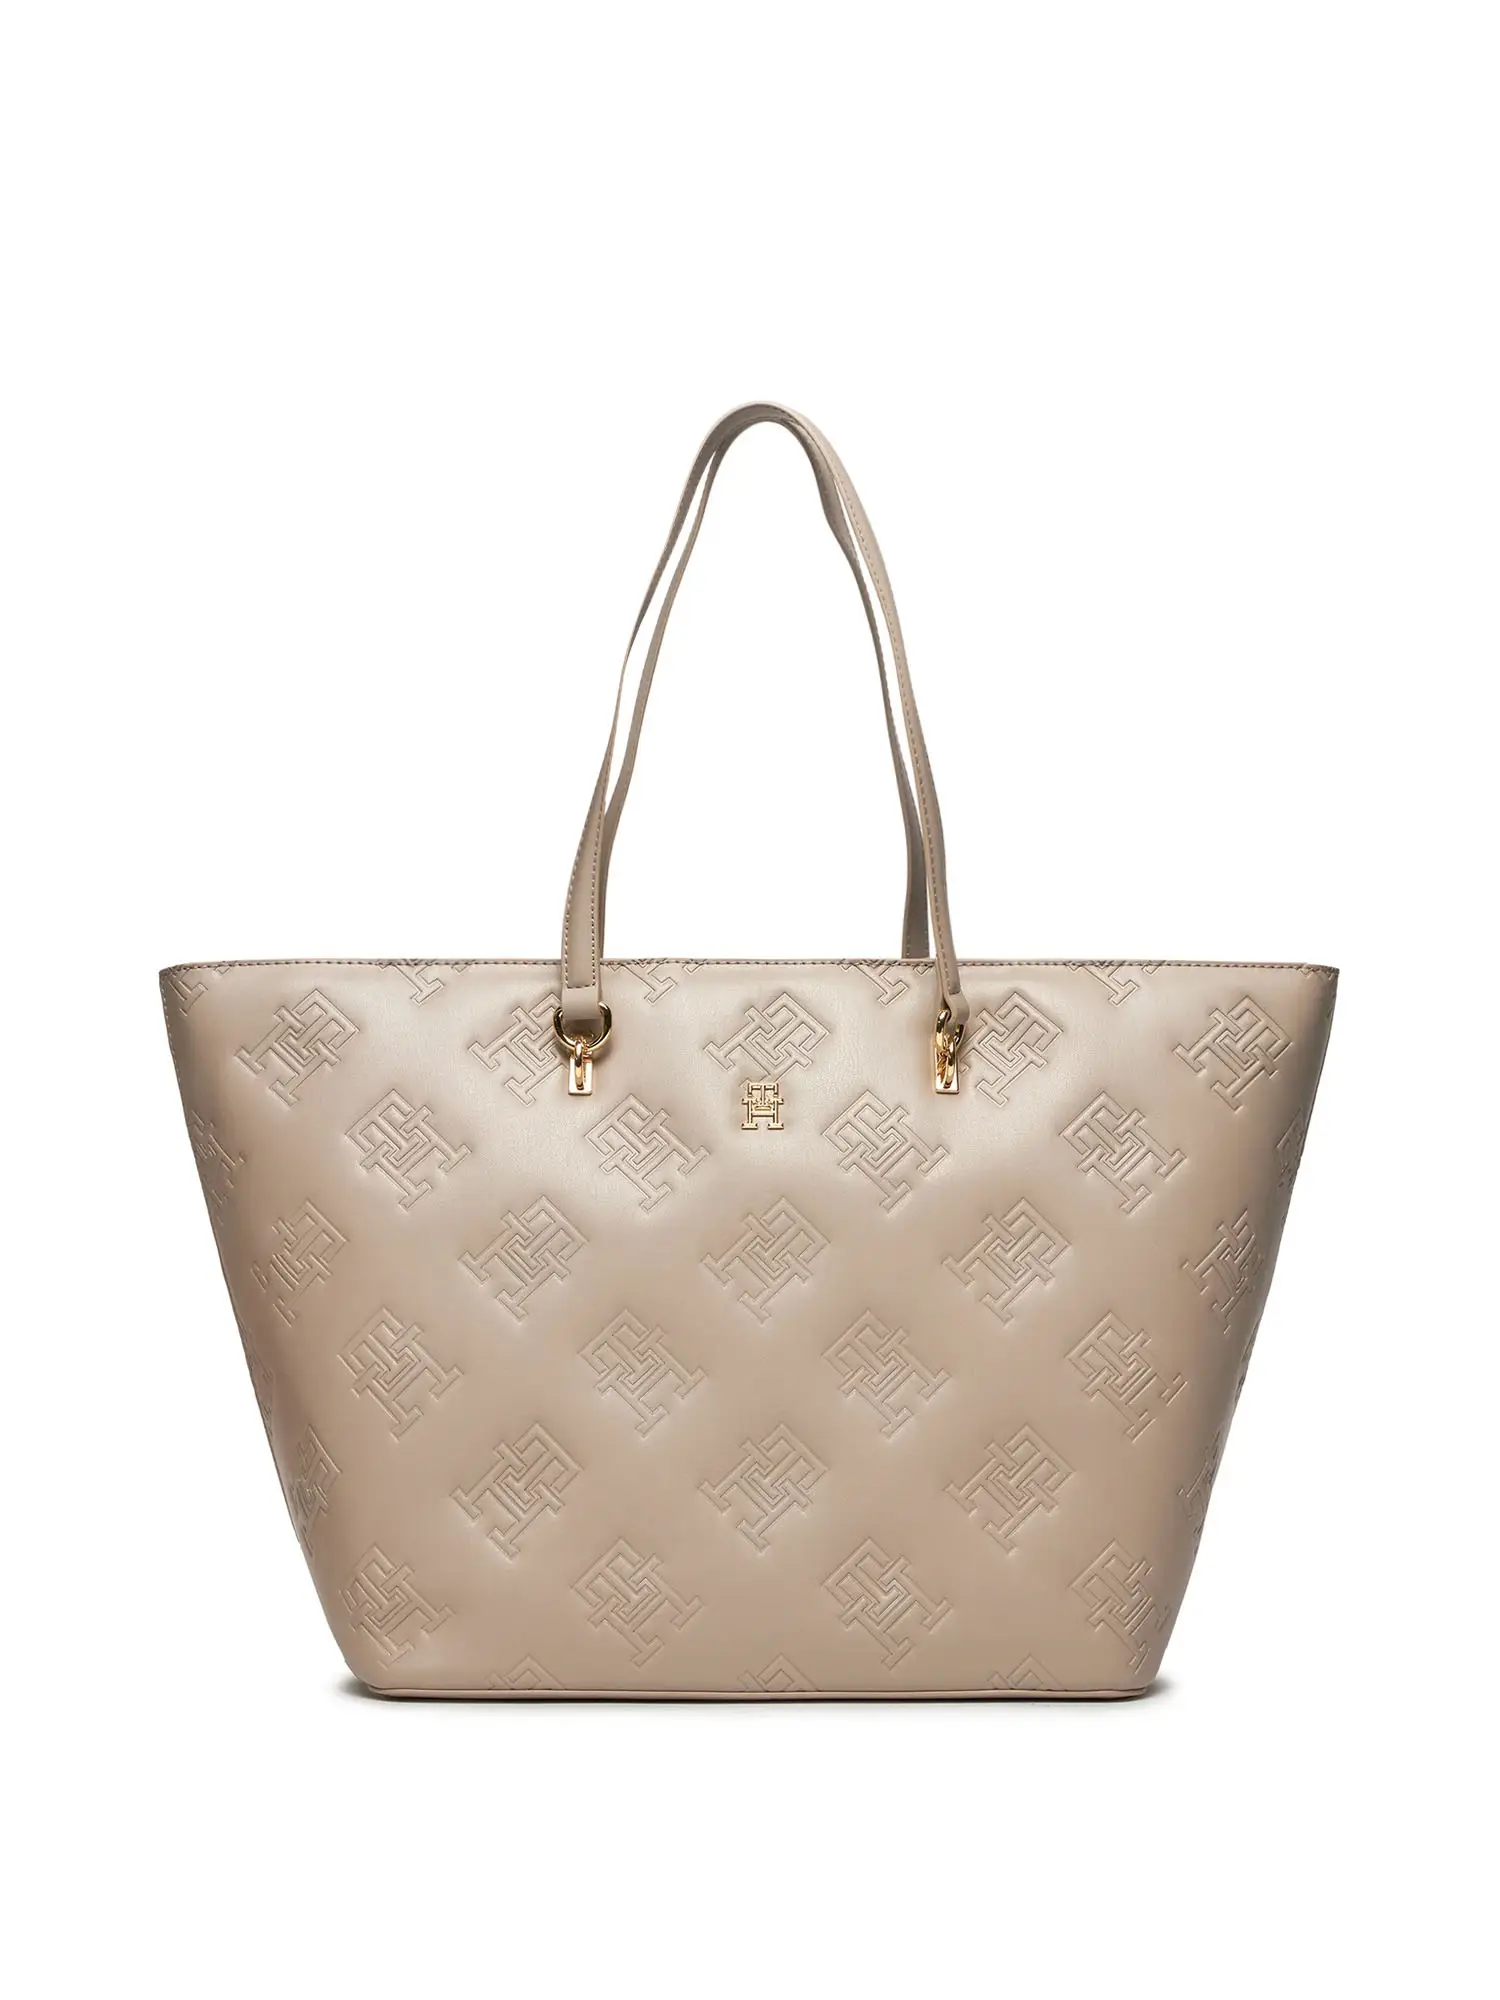 TOTE DONNA - TOMMY HILFIGER - AW0AW15726 - TAUPE, UNICA